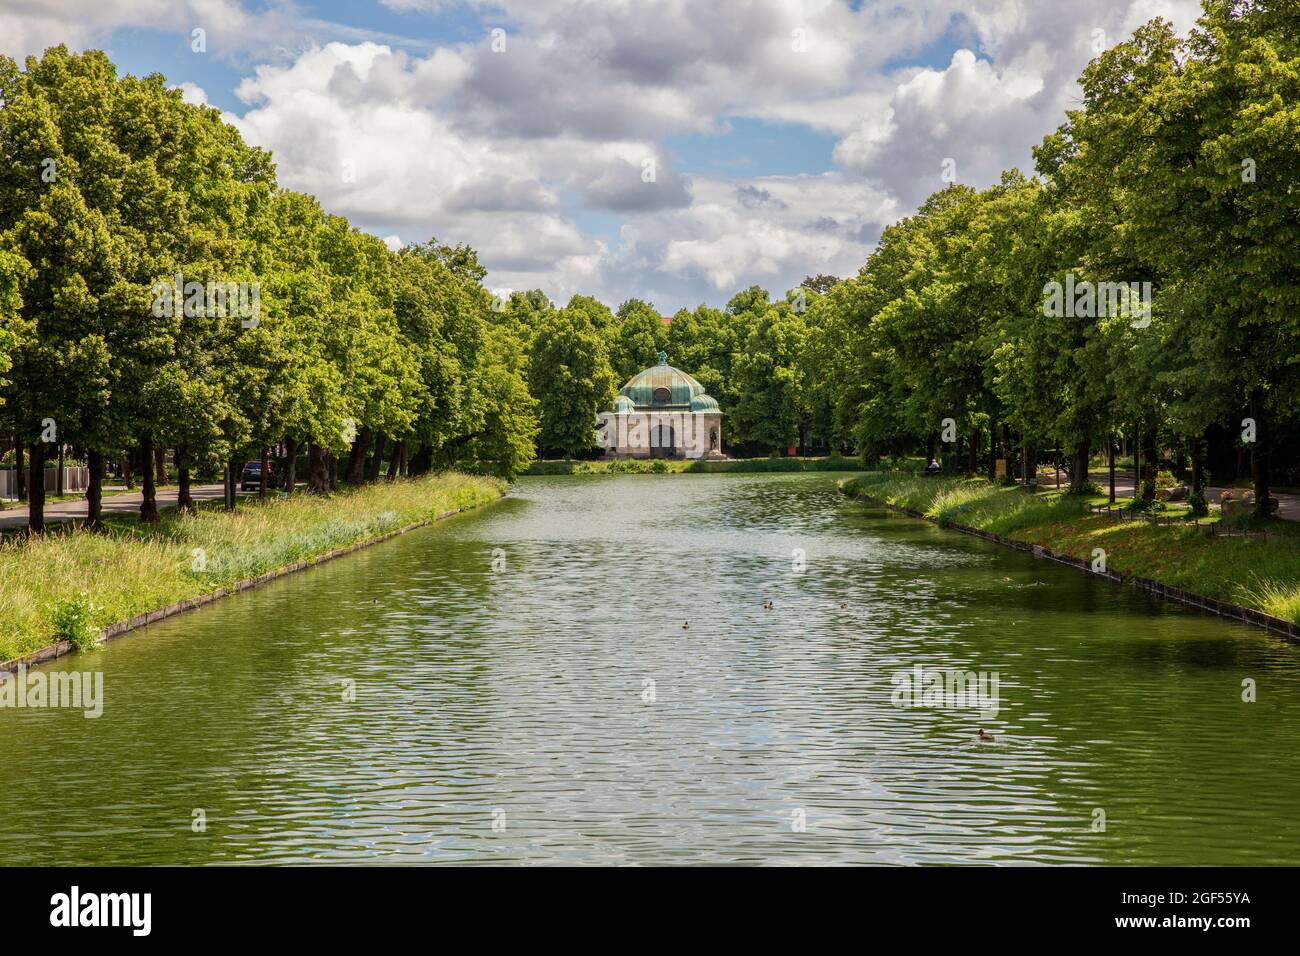 Germany, Bavaria, Munich, Hubertusbrunnen fountain at eastern endpoint of canal in Nymphenburg Palace Park Stock Photo